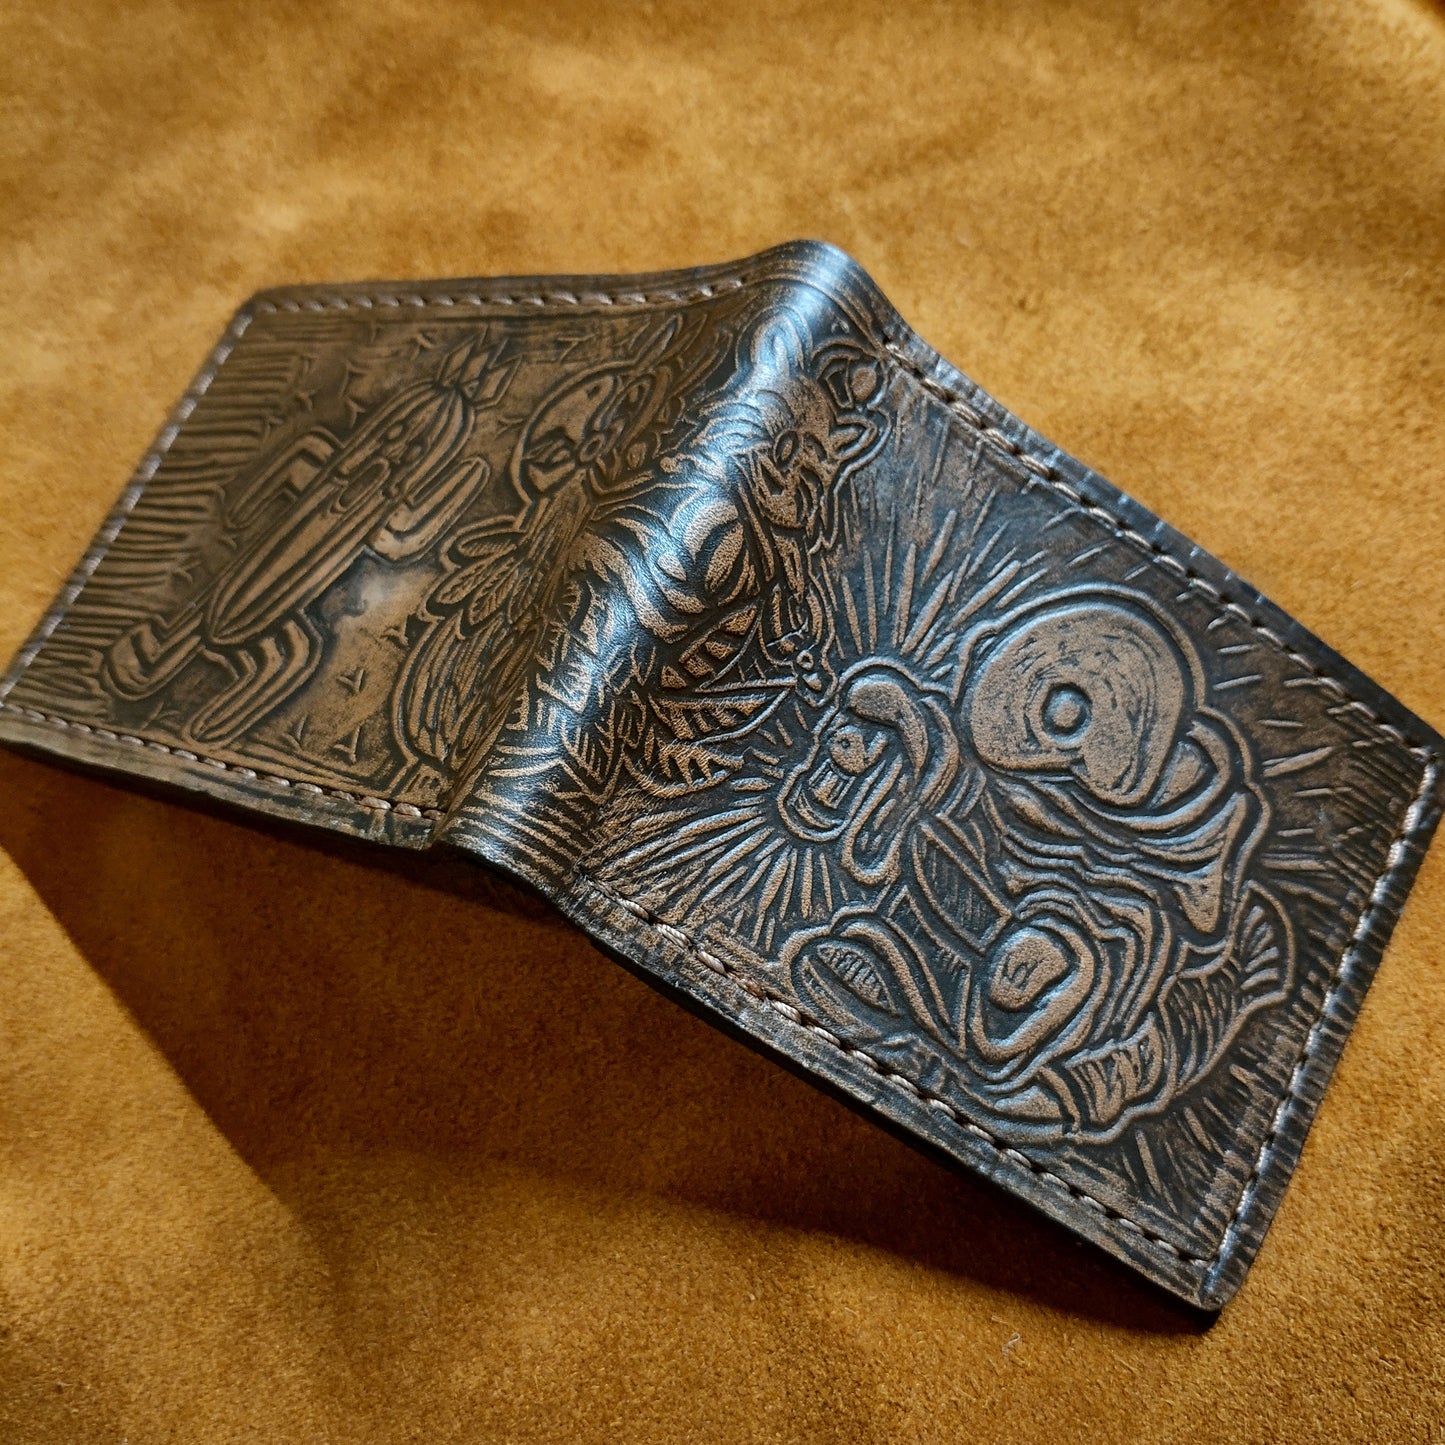 Textured - Cactuar - Chocobo and Tonberry - dark brown Leather Bifold Wallet - Handcrafted Final Fantasy 14 inspired Wallet -